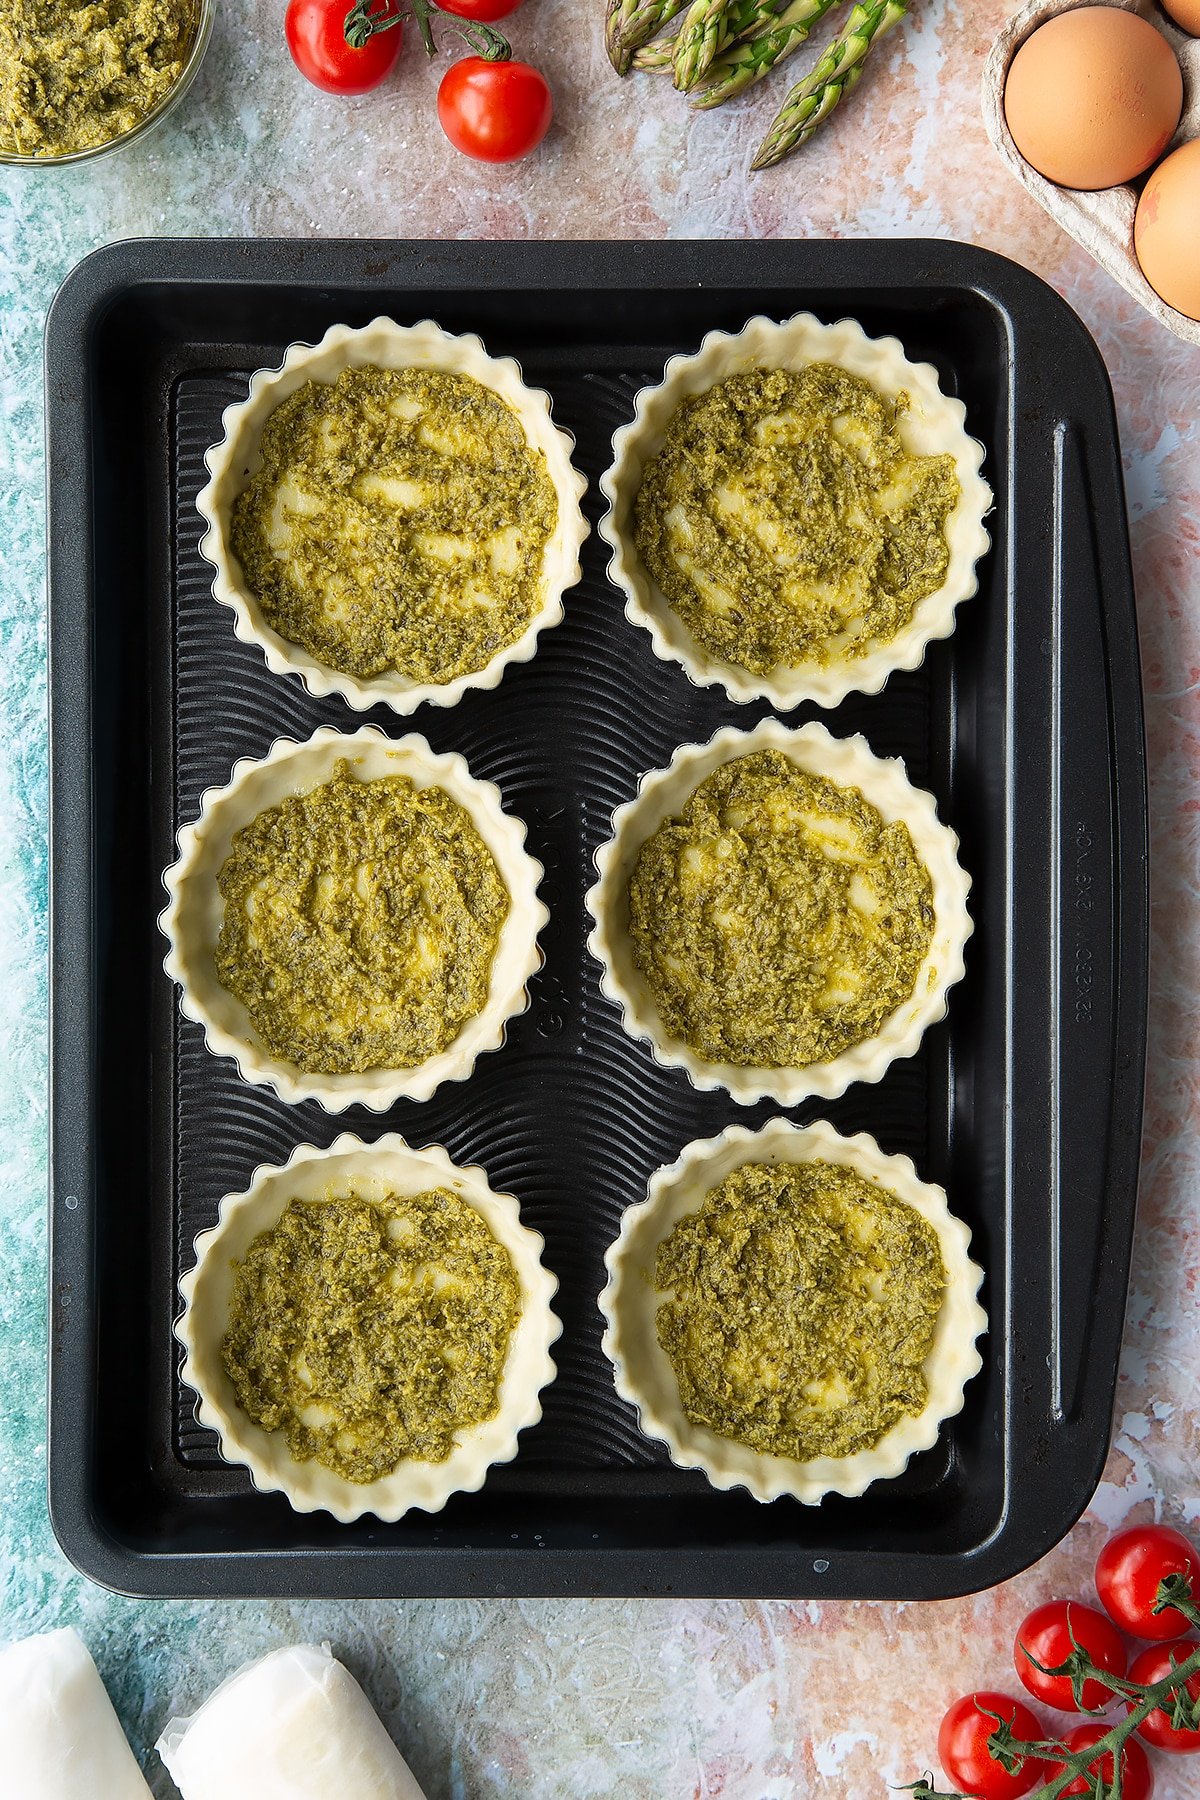 Six tartlet tins on a baking tray. Pastry is fitted and trimmed in the tins. The bottoms are spread with pesto. Ingredients to make asparagus tartlets surround the tray.